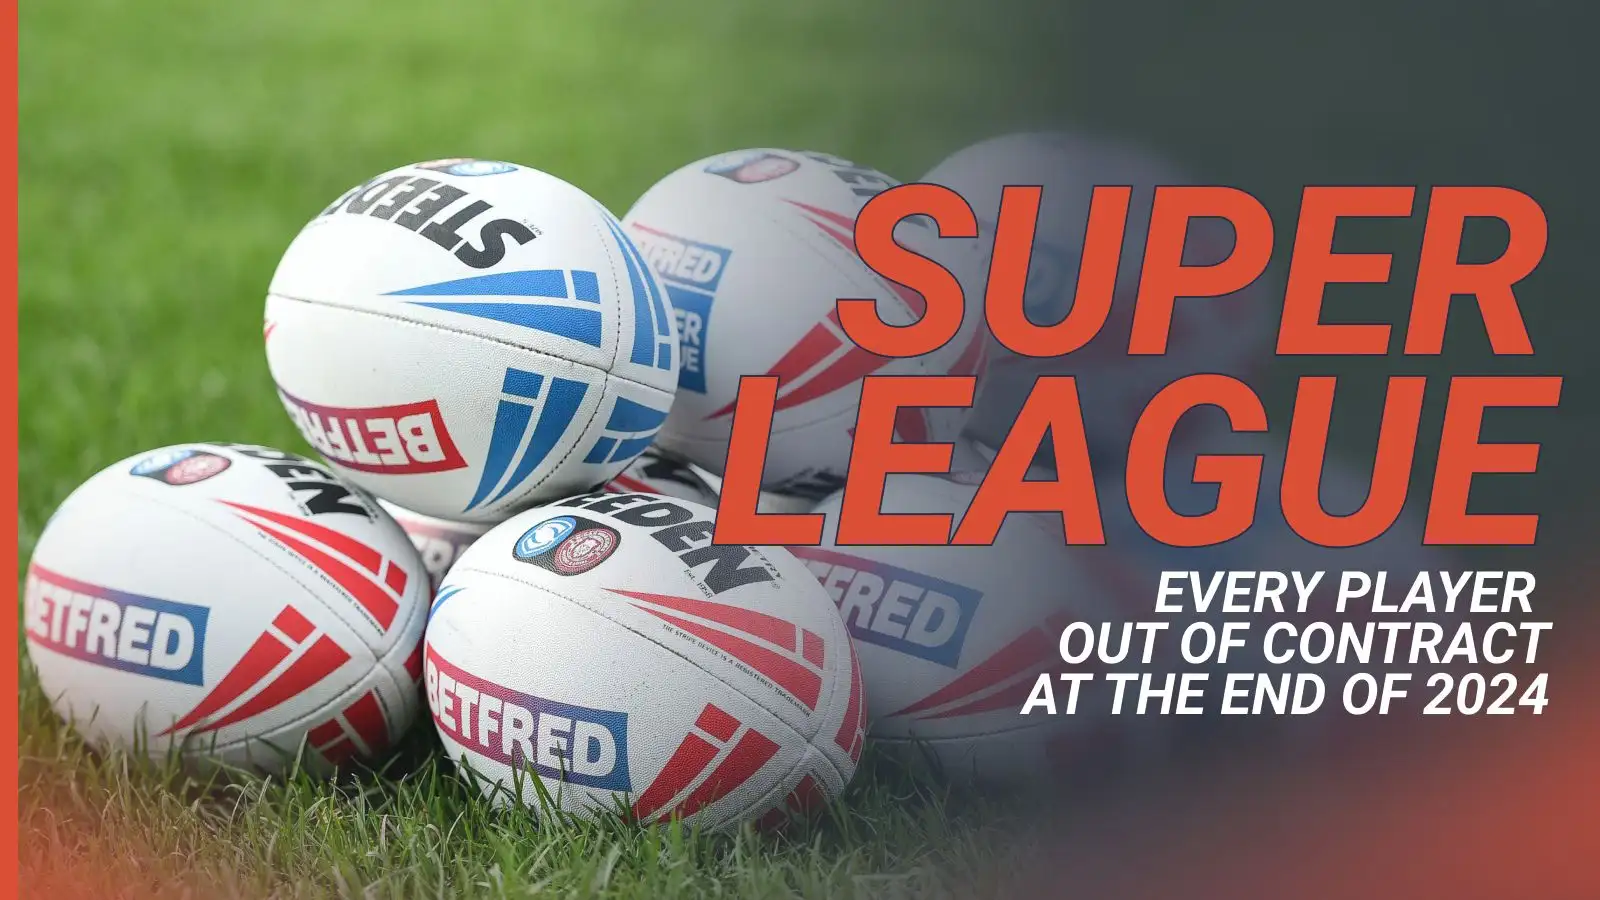 SUPER LEAGUE; Every player out of contract at the end of 2024